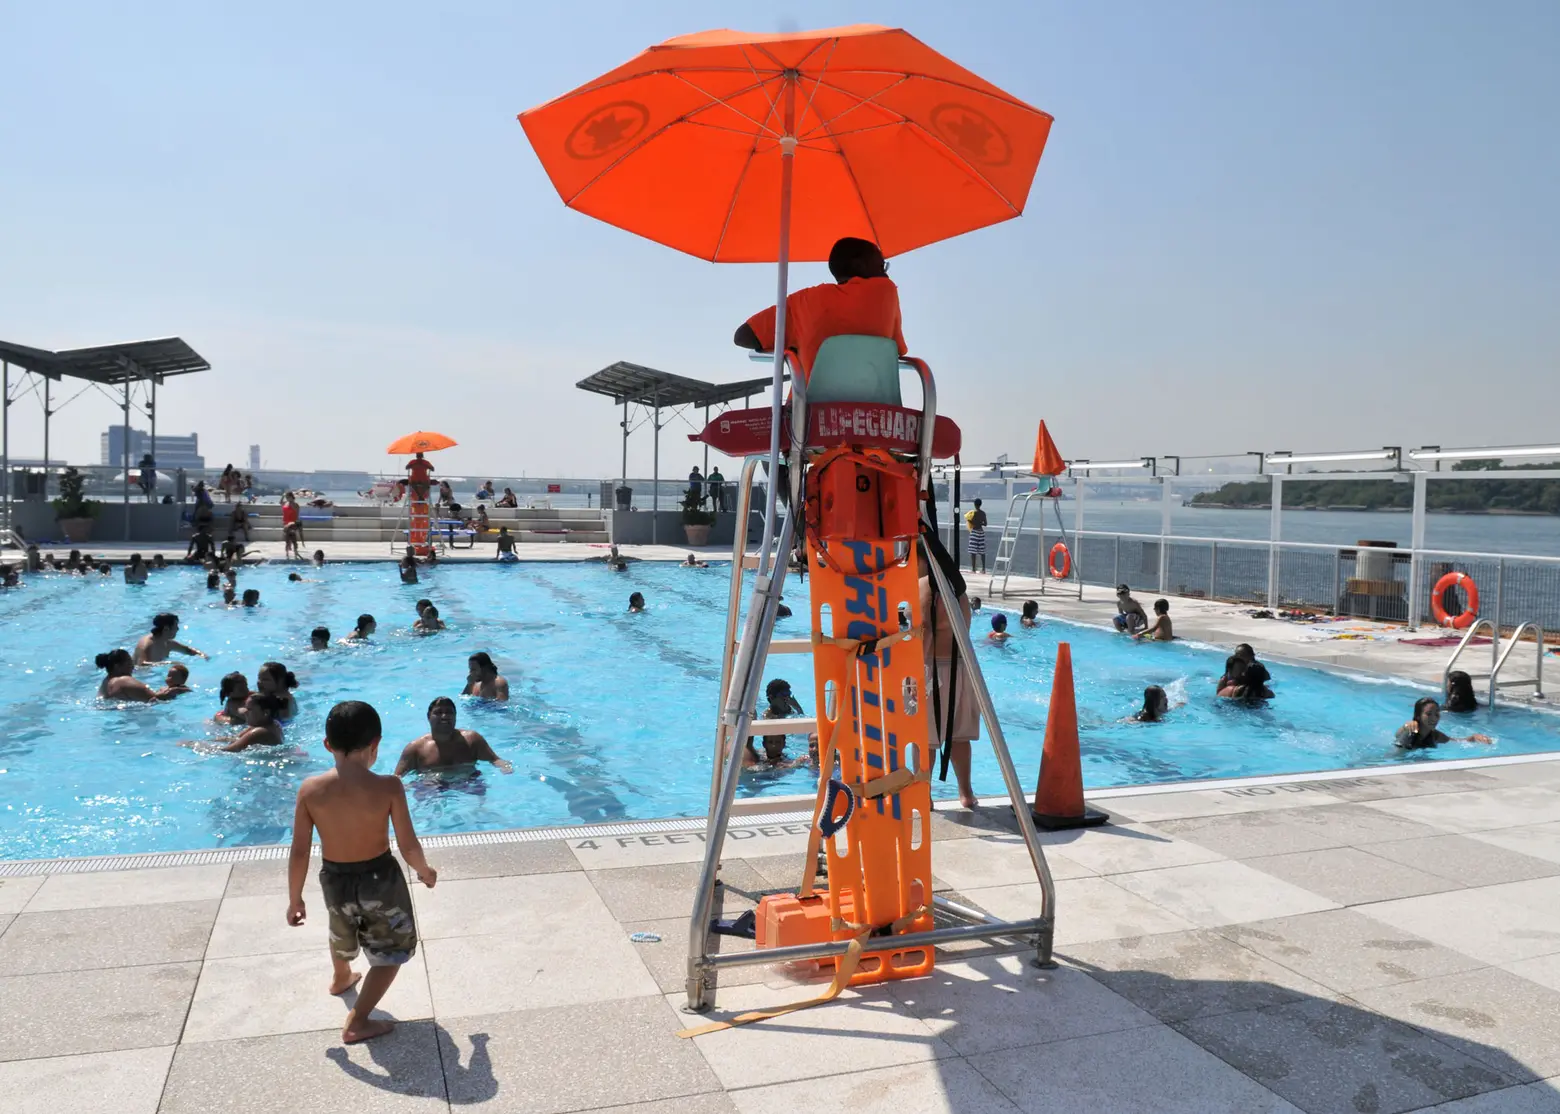 NYC outdoor pools will be closed all summer because of coronavirus pandemic